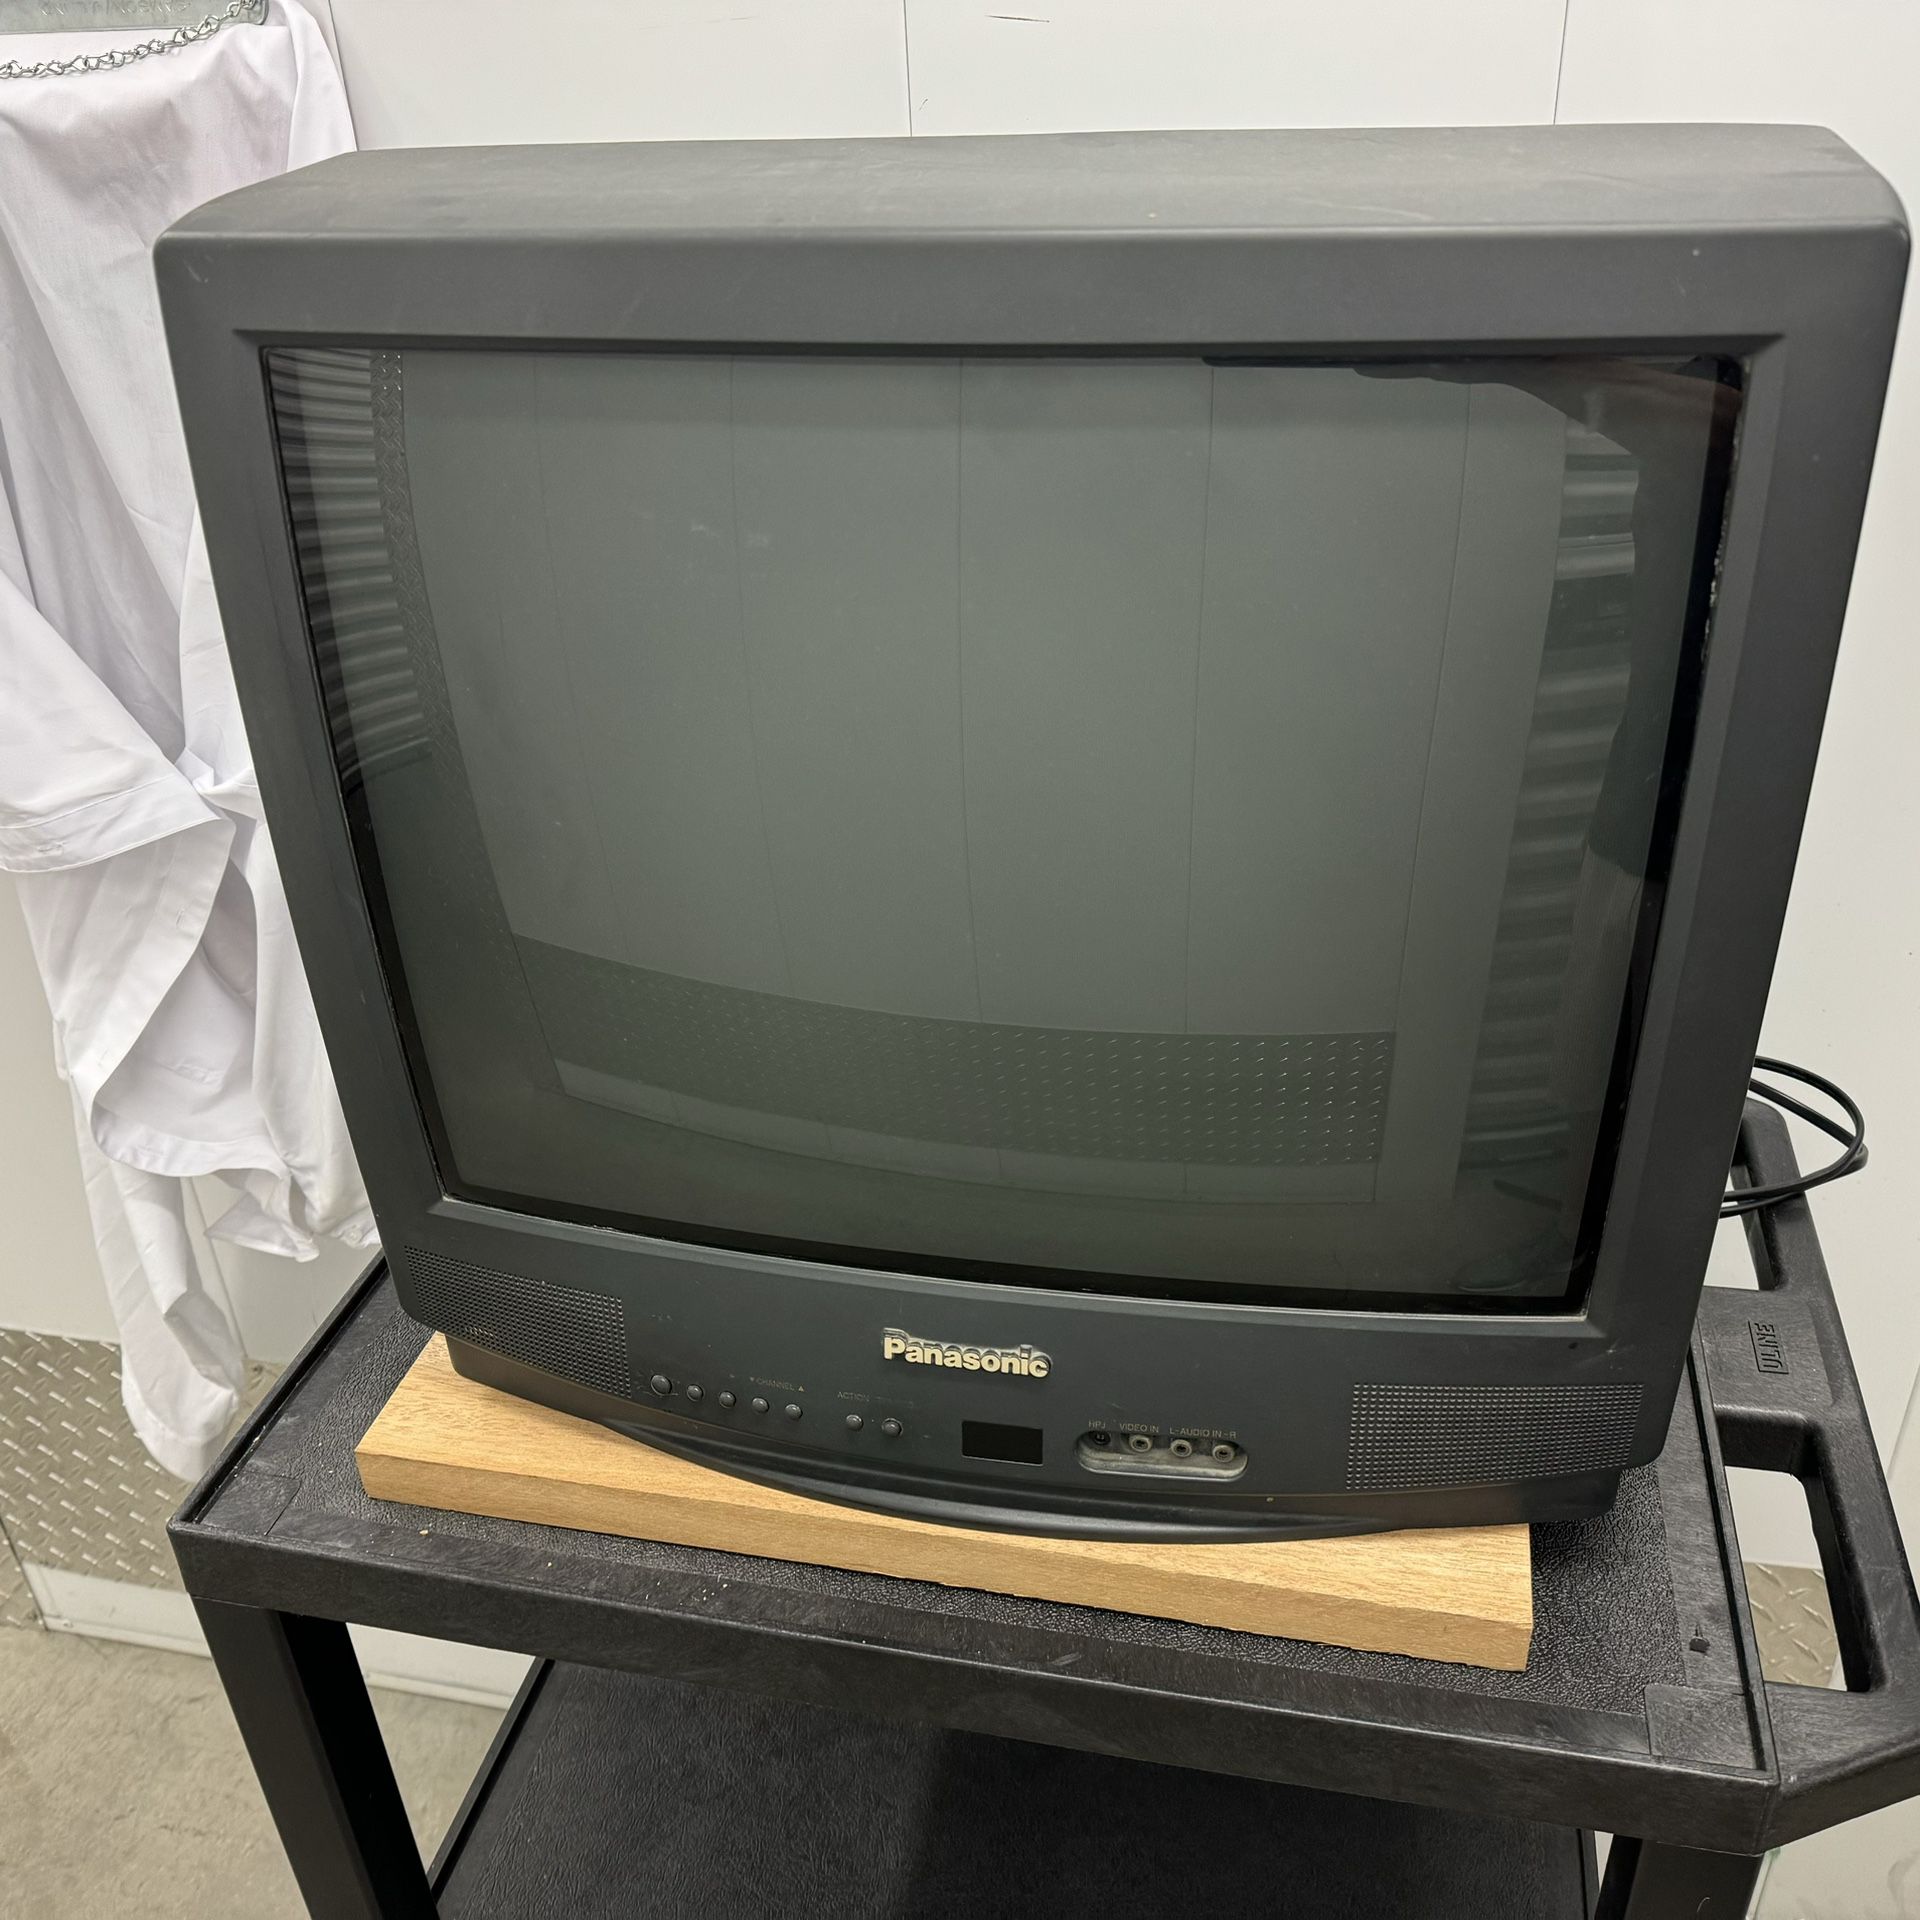 Panasonic 20.5 inch CRT TV Color Television with Remote ~ Front Panel Controls and Inputs ~ Rear Antenna and A/V Inputs - Can Demo 